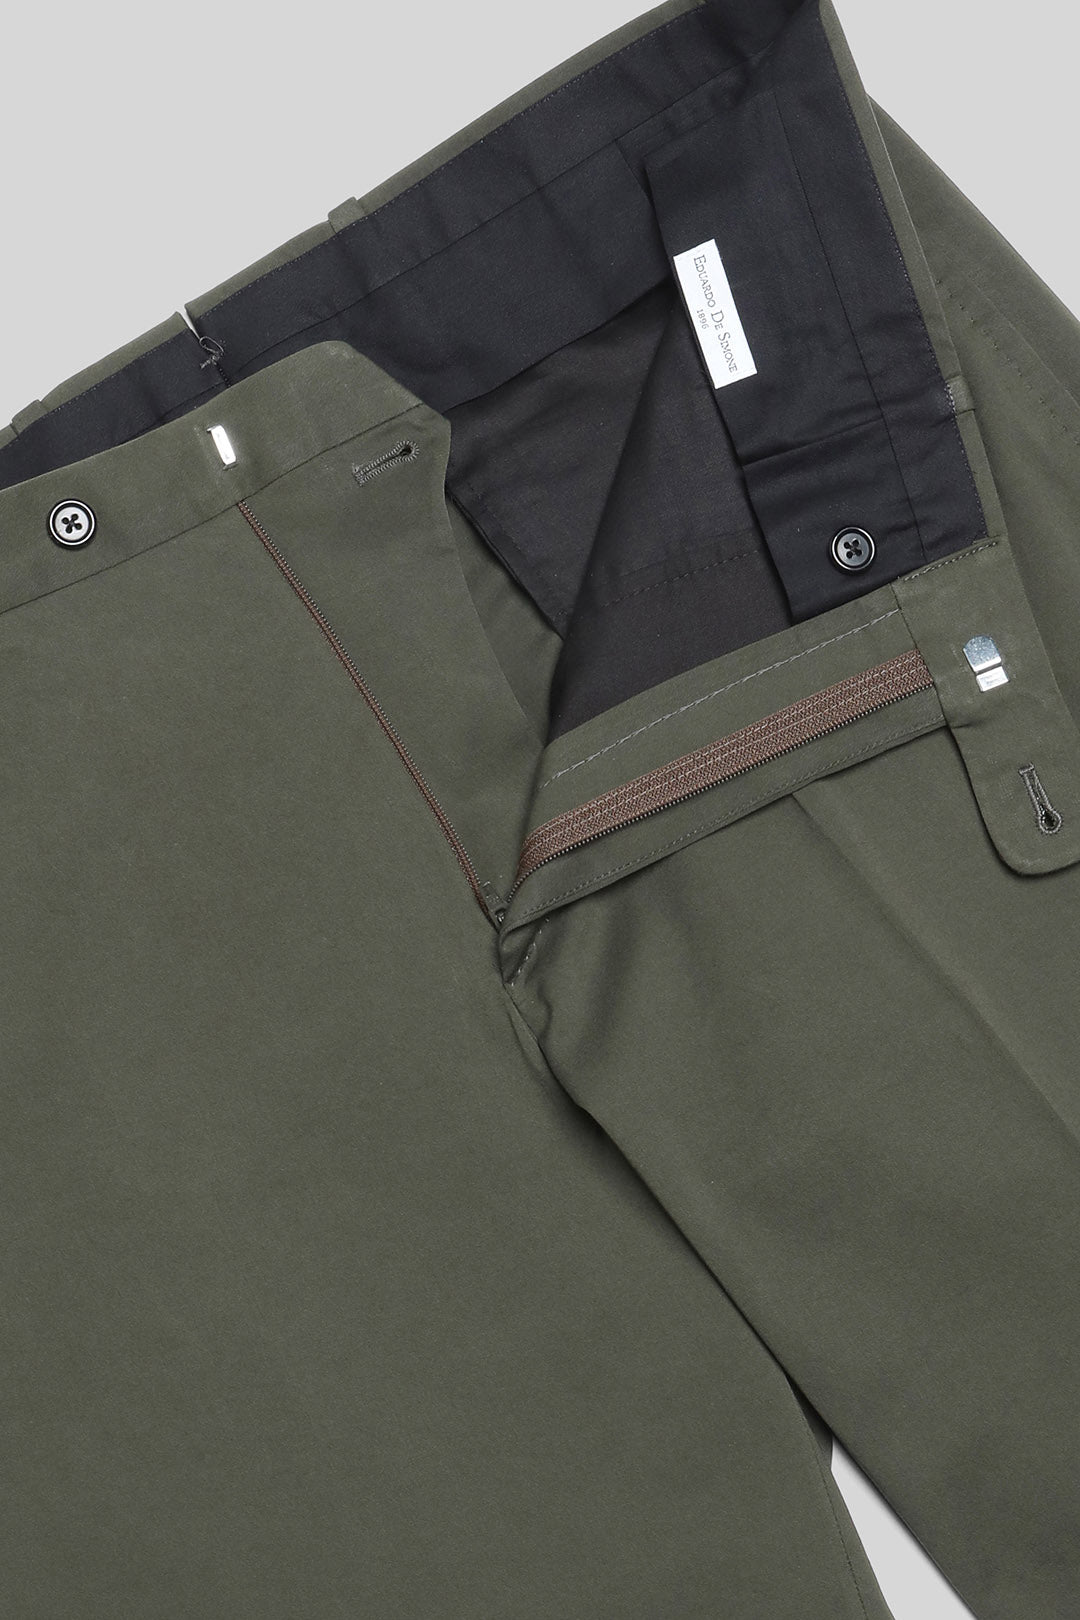 Buy Kiton Olive Cotton, Silk And Cashmere Trousers - Green At 33% Off |  Editorialist